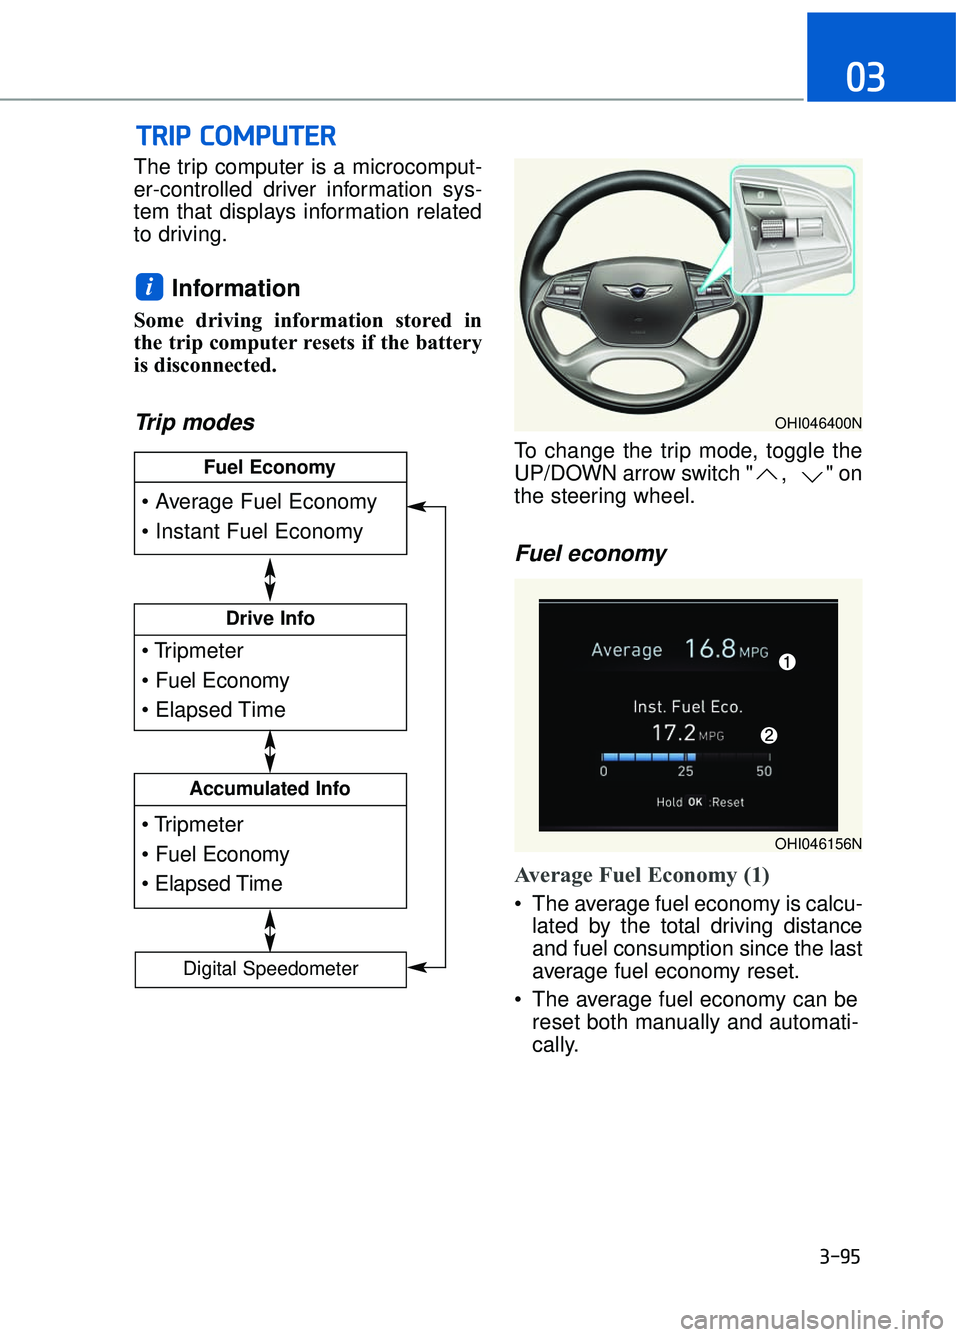 GENESIS G90 2017  Owners Manual 3-95
03
The trip computer is a microcomput-
er-controlled driver information sys-
tem that displays information related
to driving.
Information
Some driving information stored in
the trip computer res